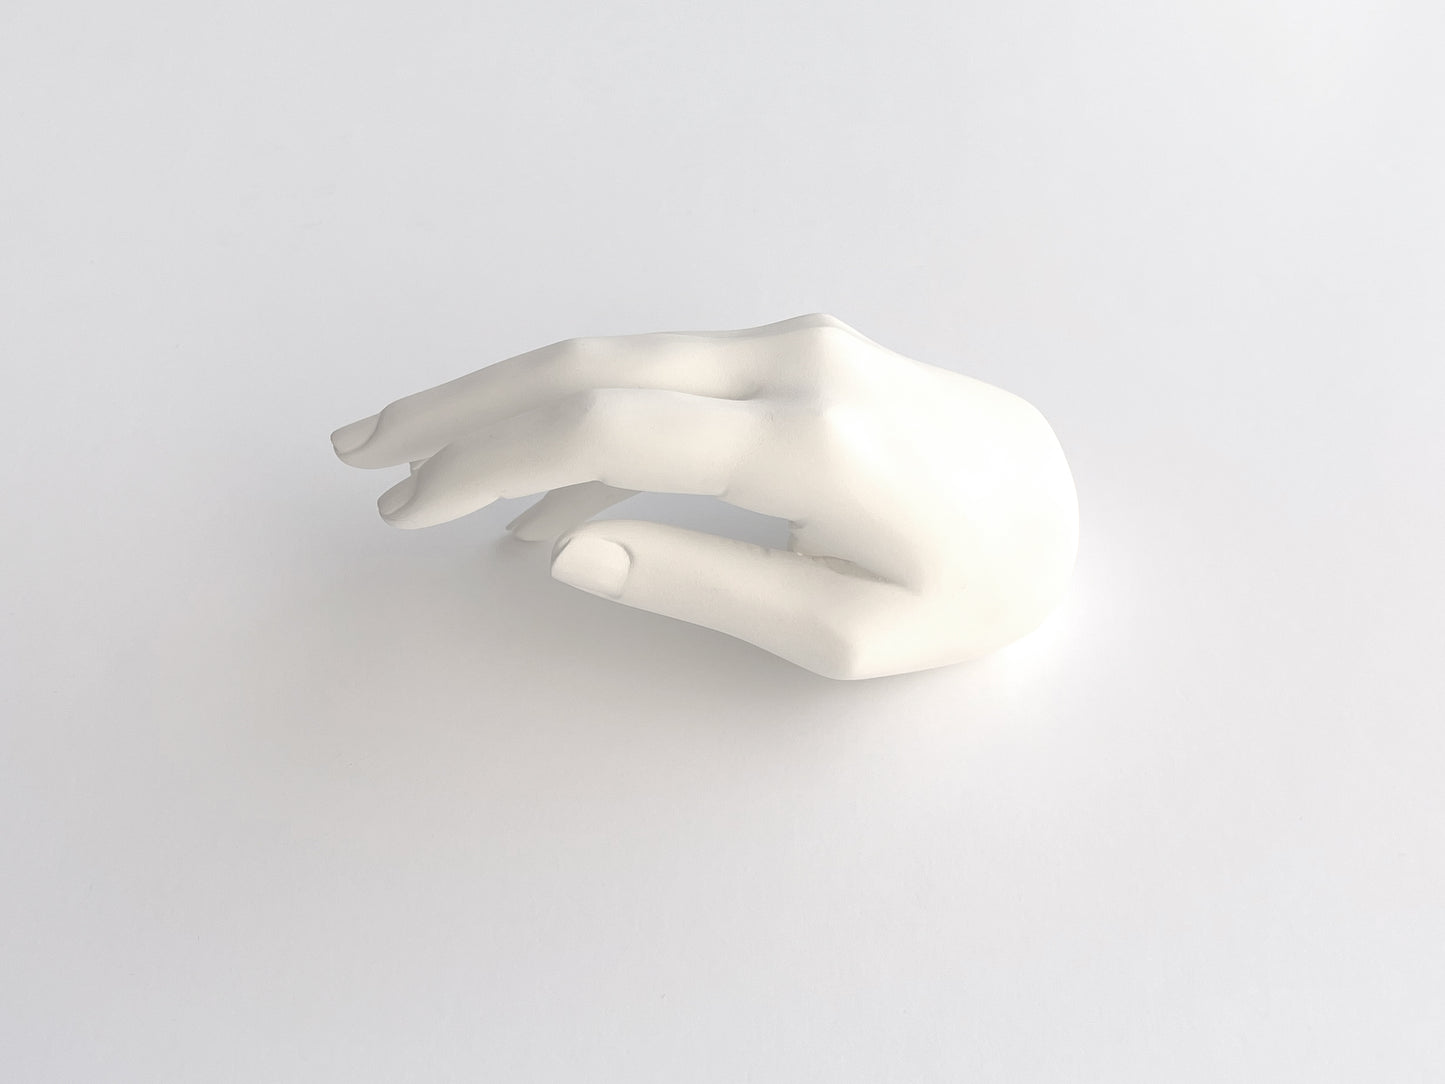 Hand (from Object Garden)